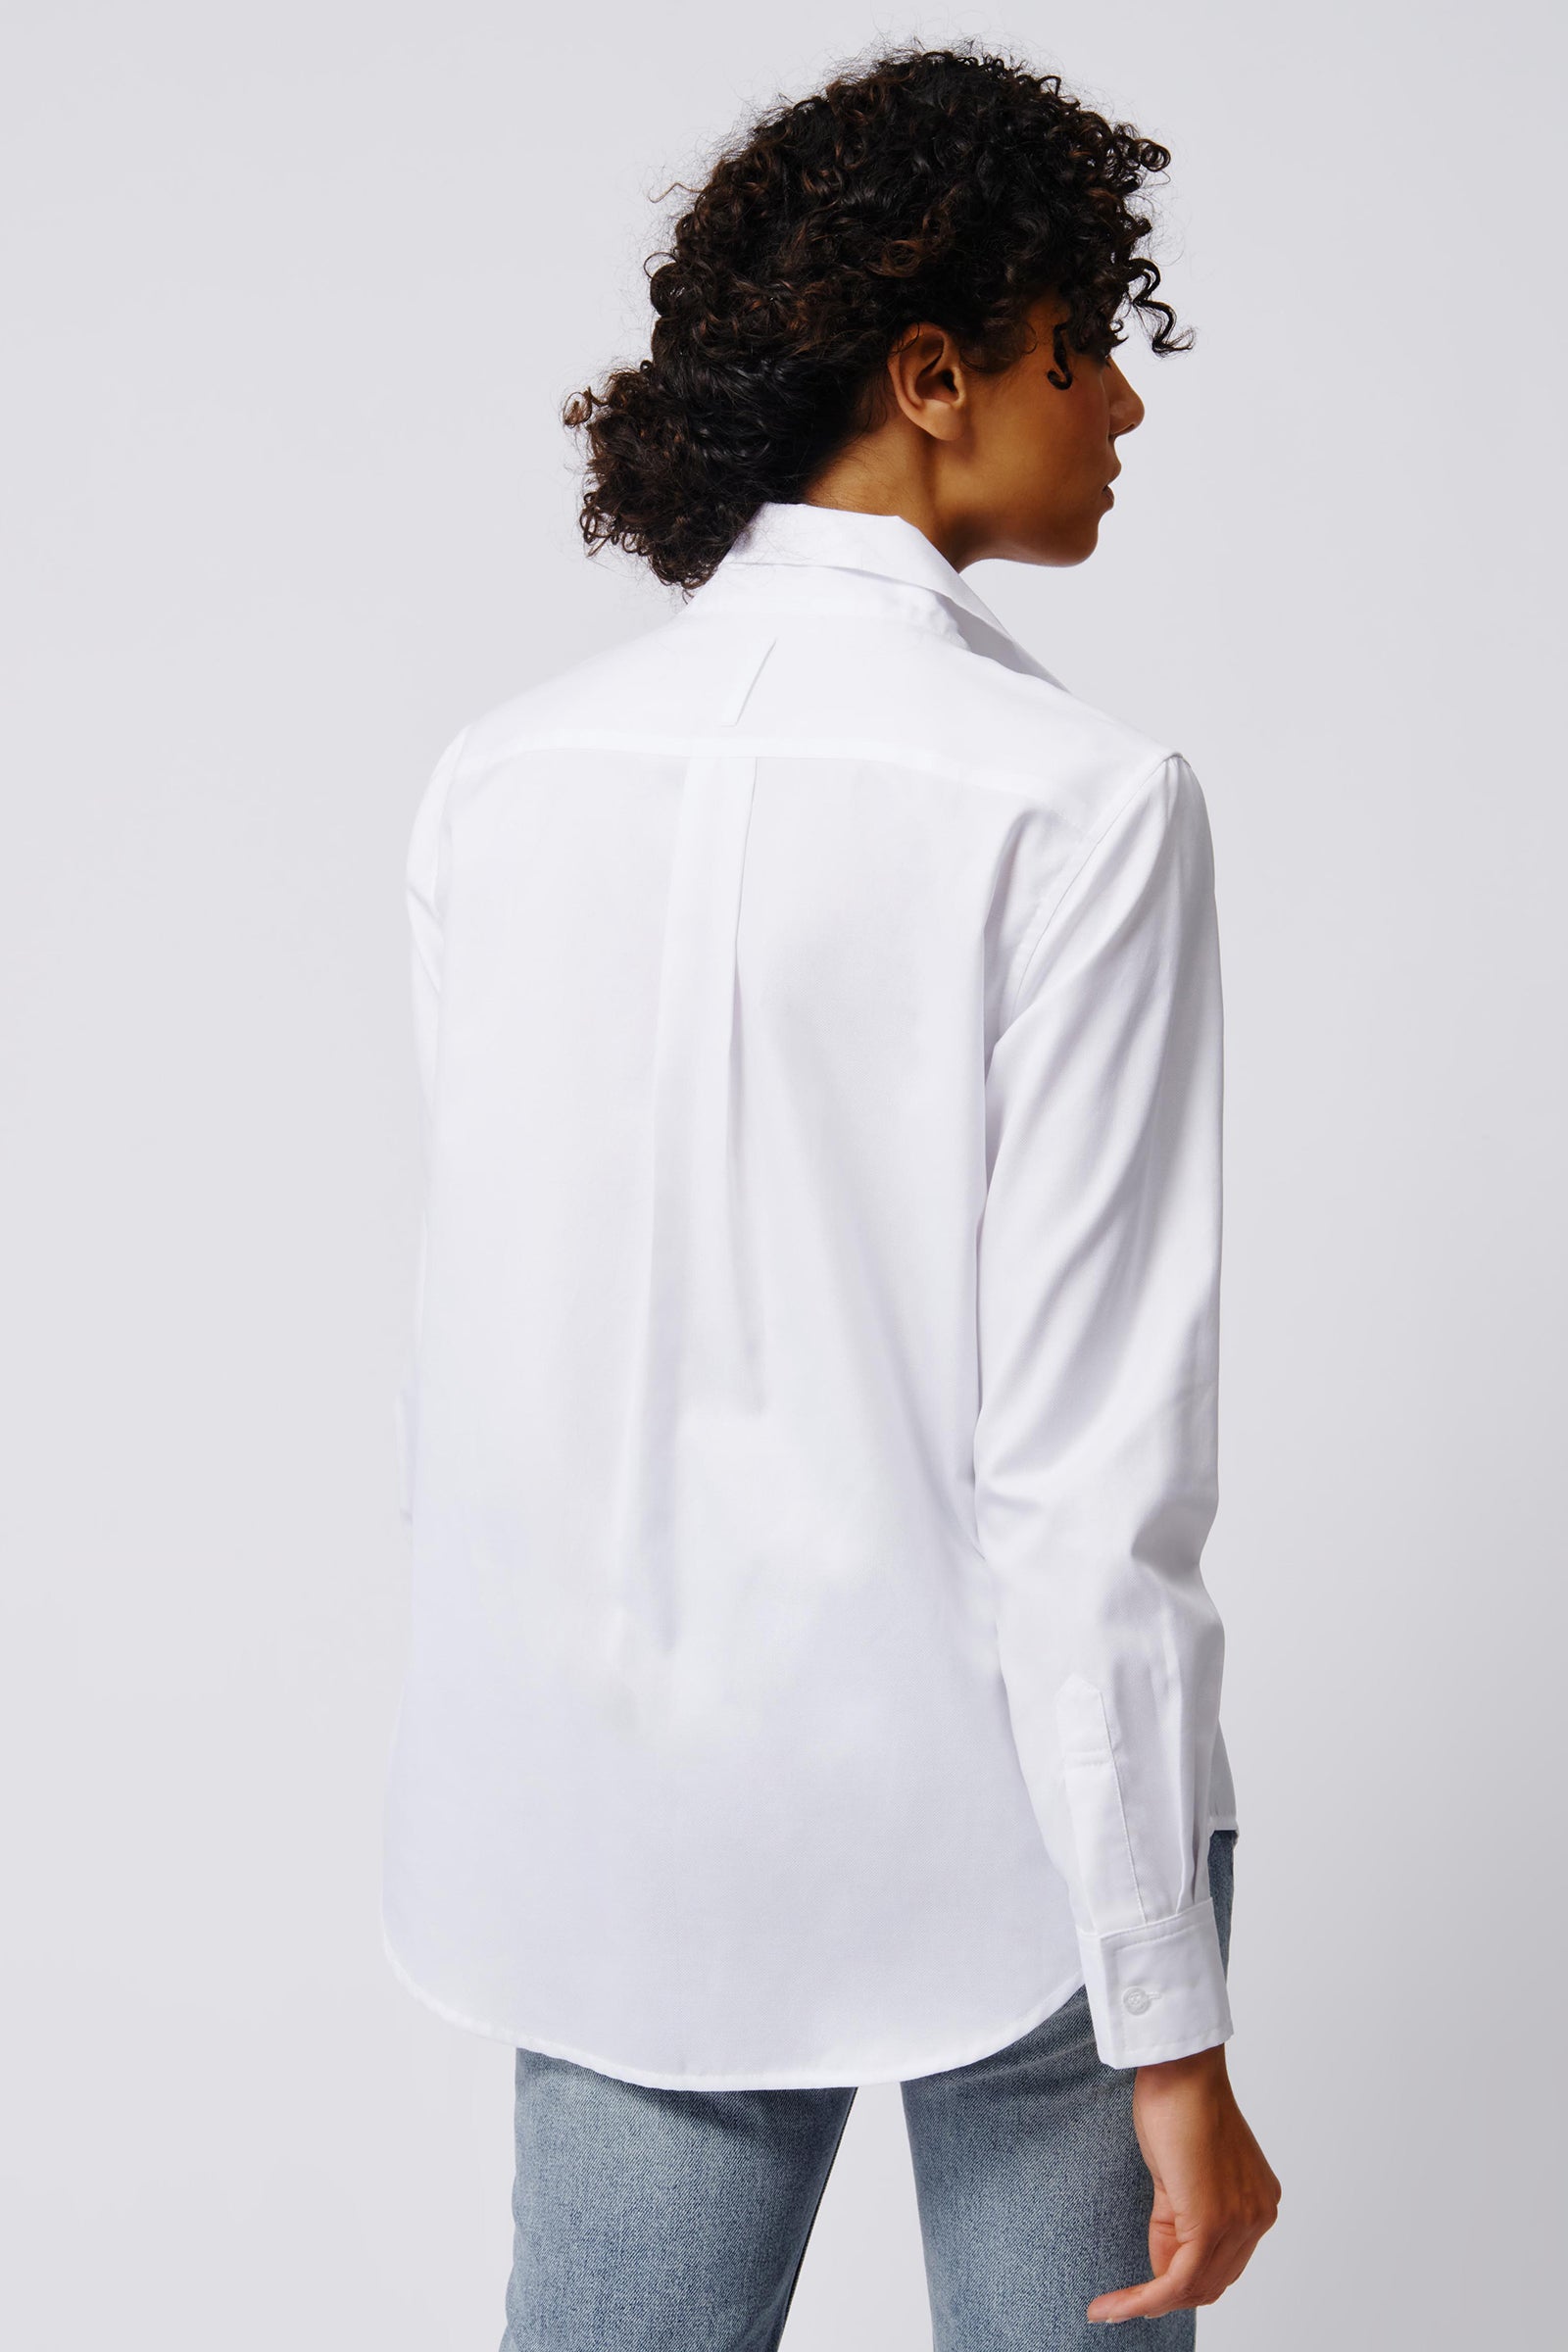 Kal Rieman Ginna Box Pleat Shirt in White Pinpoint Oxford on Model Back View Crop